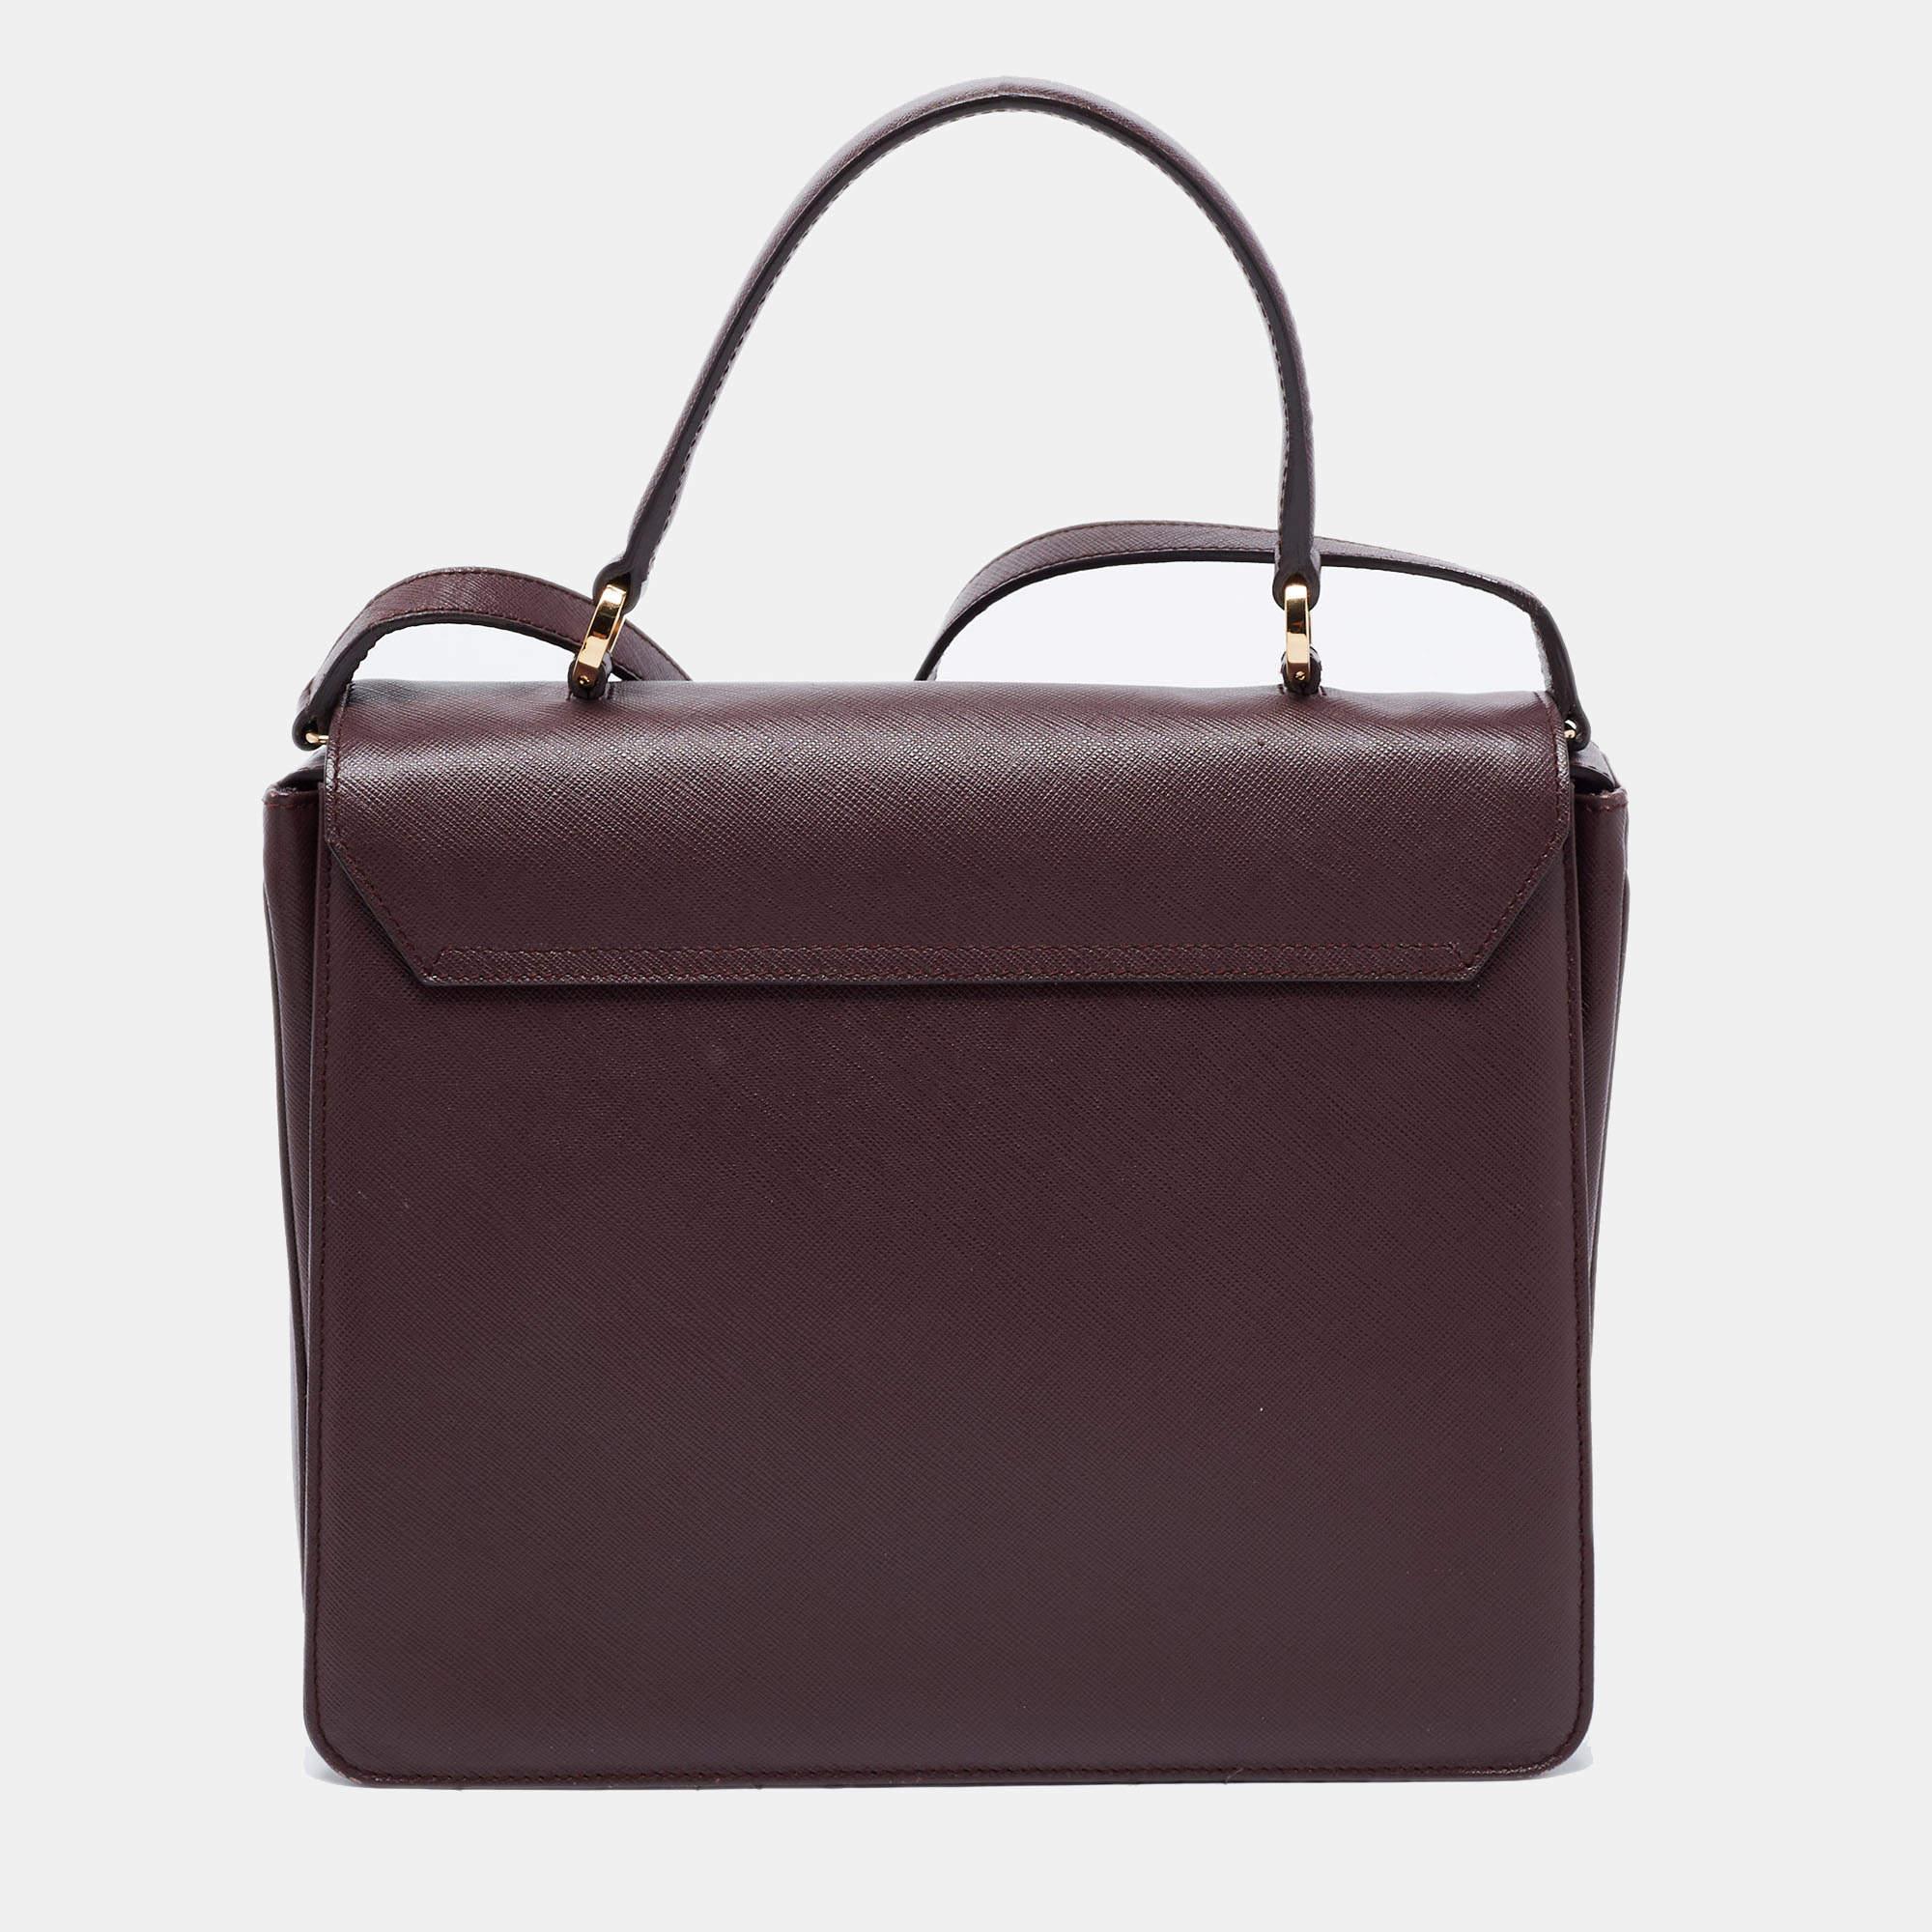 Imparting unparalleled elegance and sophistication, this designer bag is made from the finest material in a gorgeous hue. While the interior offers ample space, the top handle allows you to carry it with much style.

